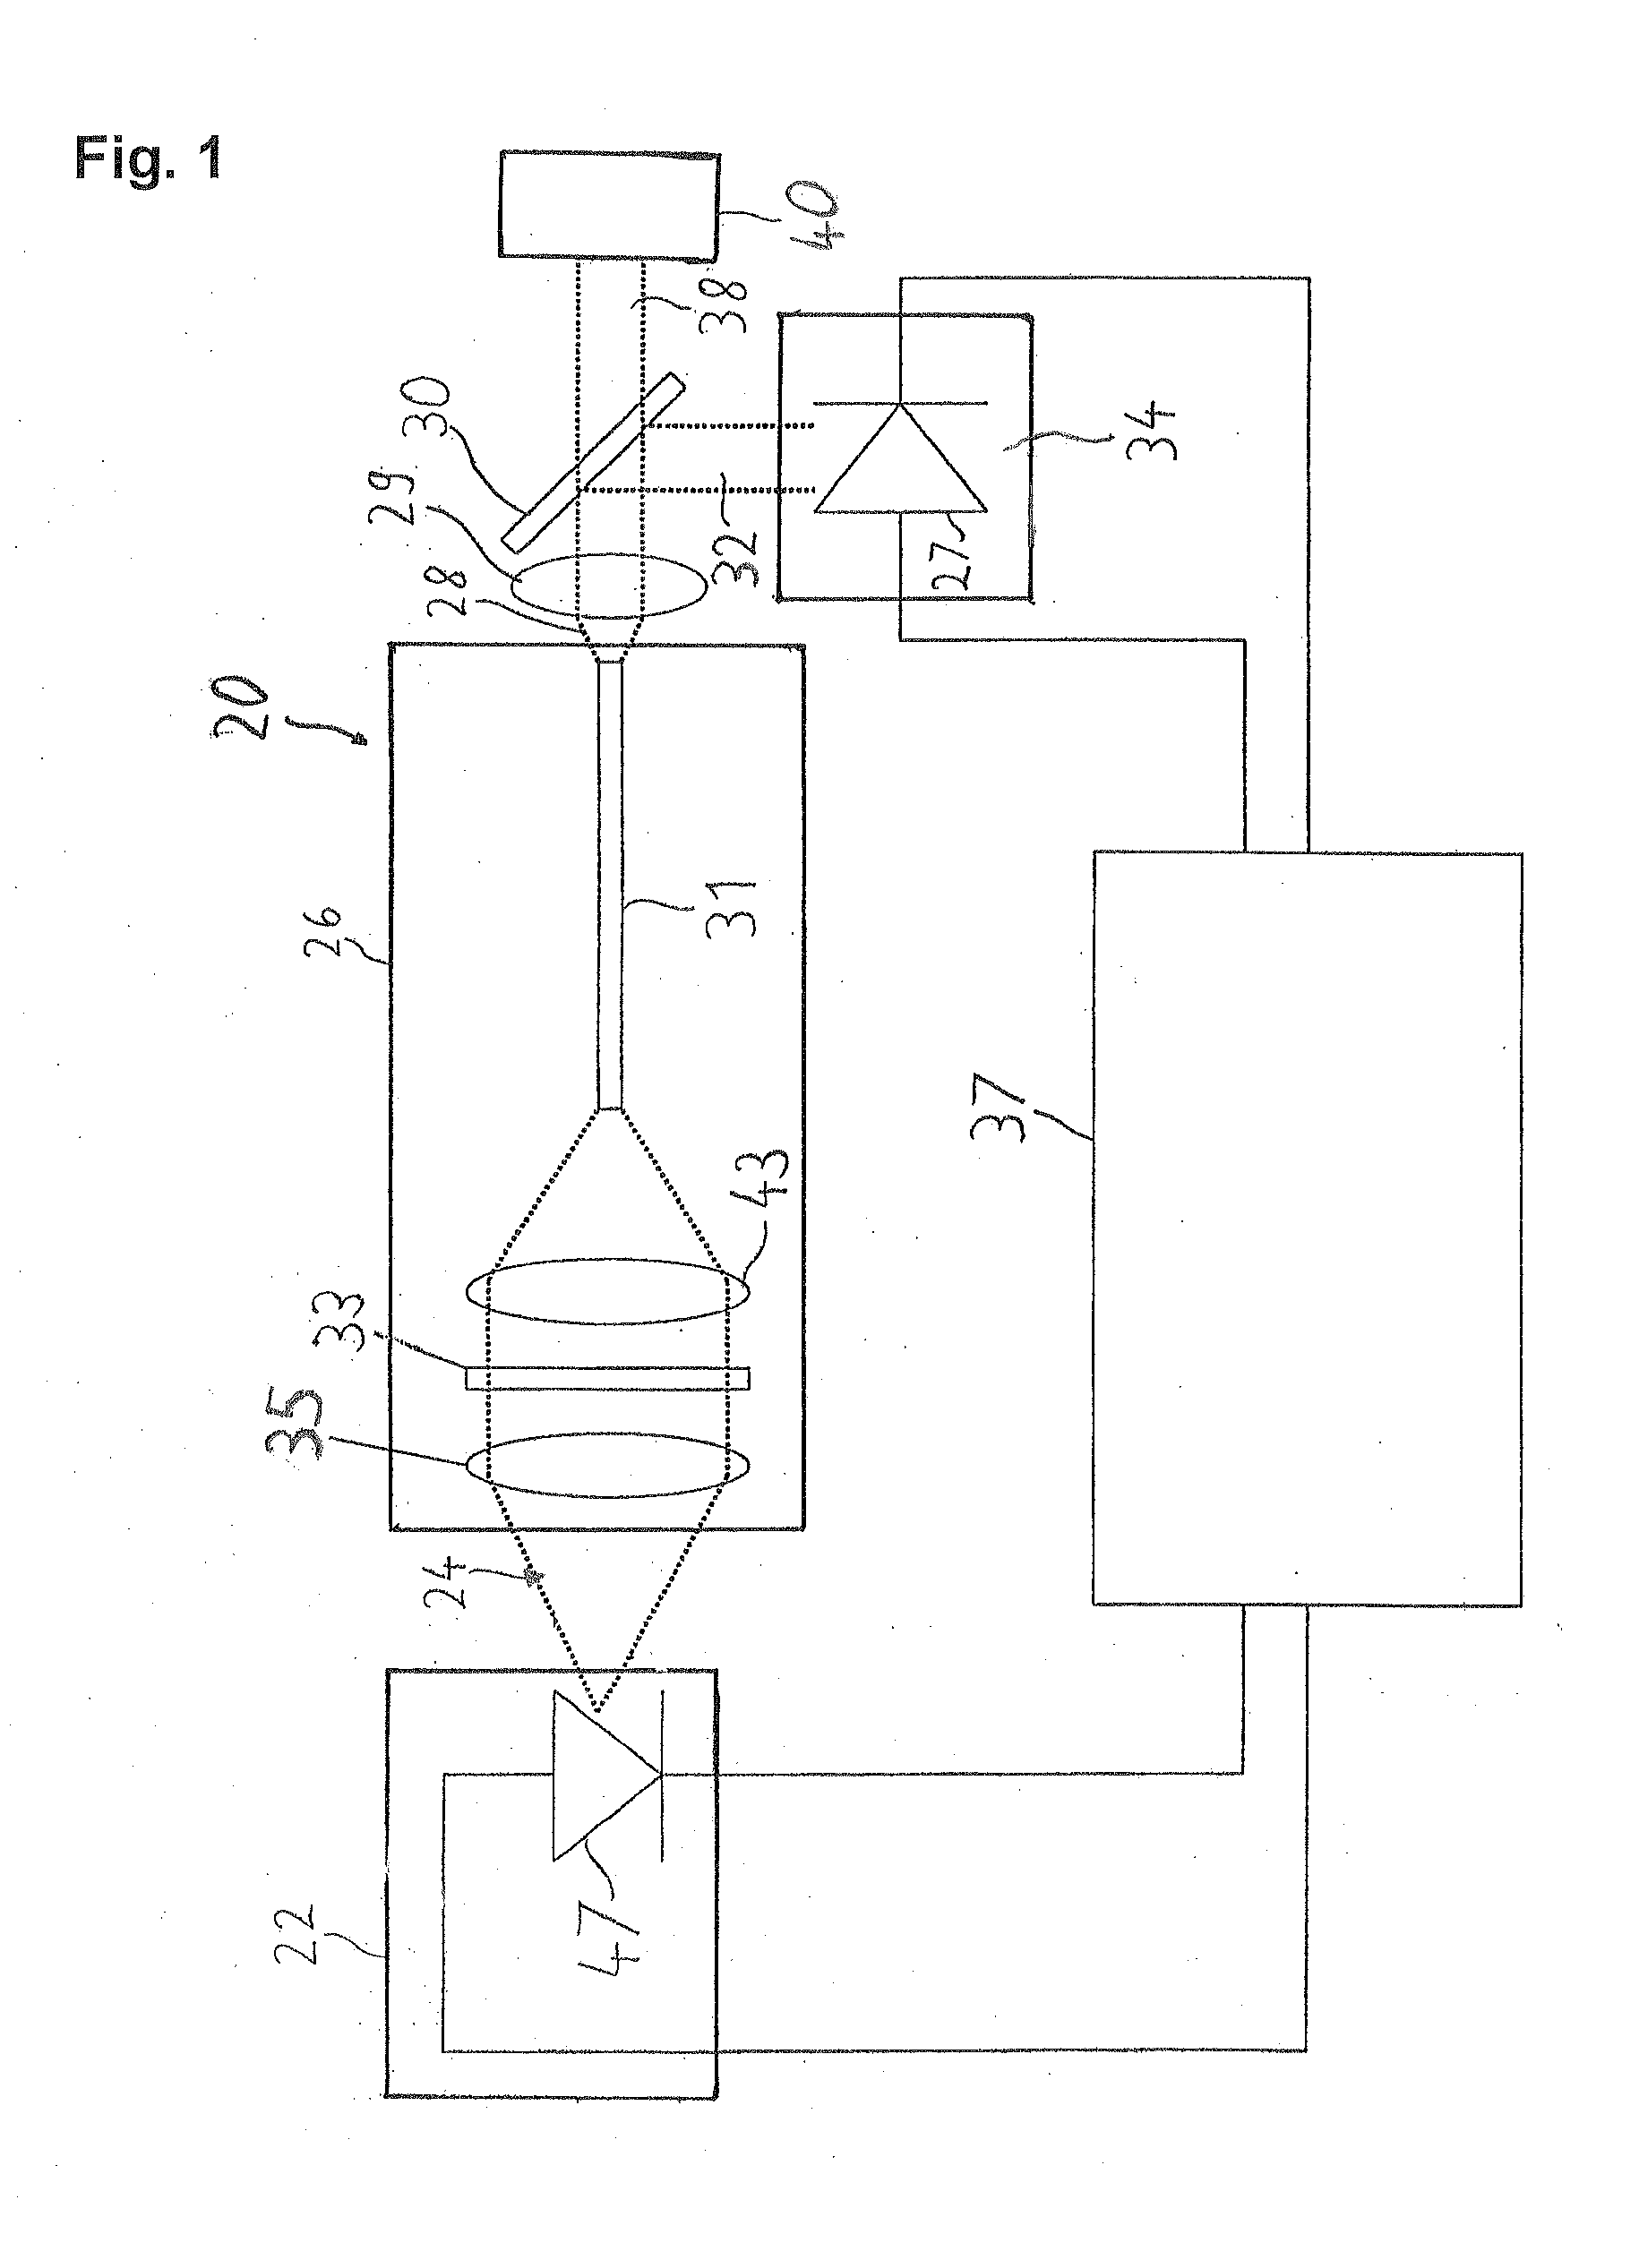 Laser system for a microscope and method for operating a laser system for a microscope